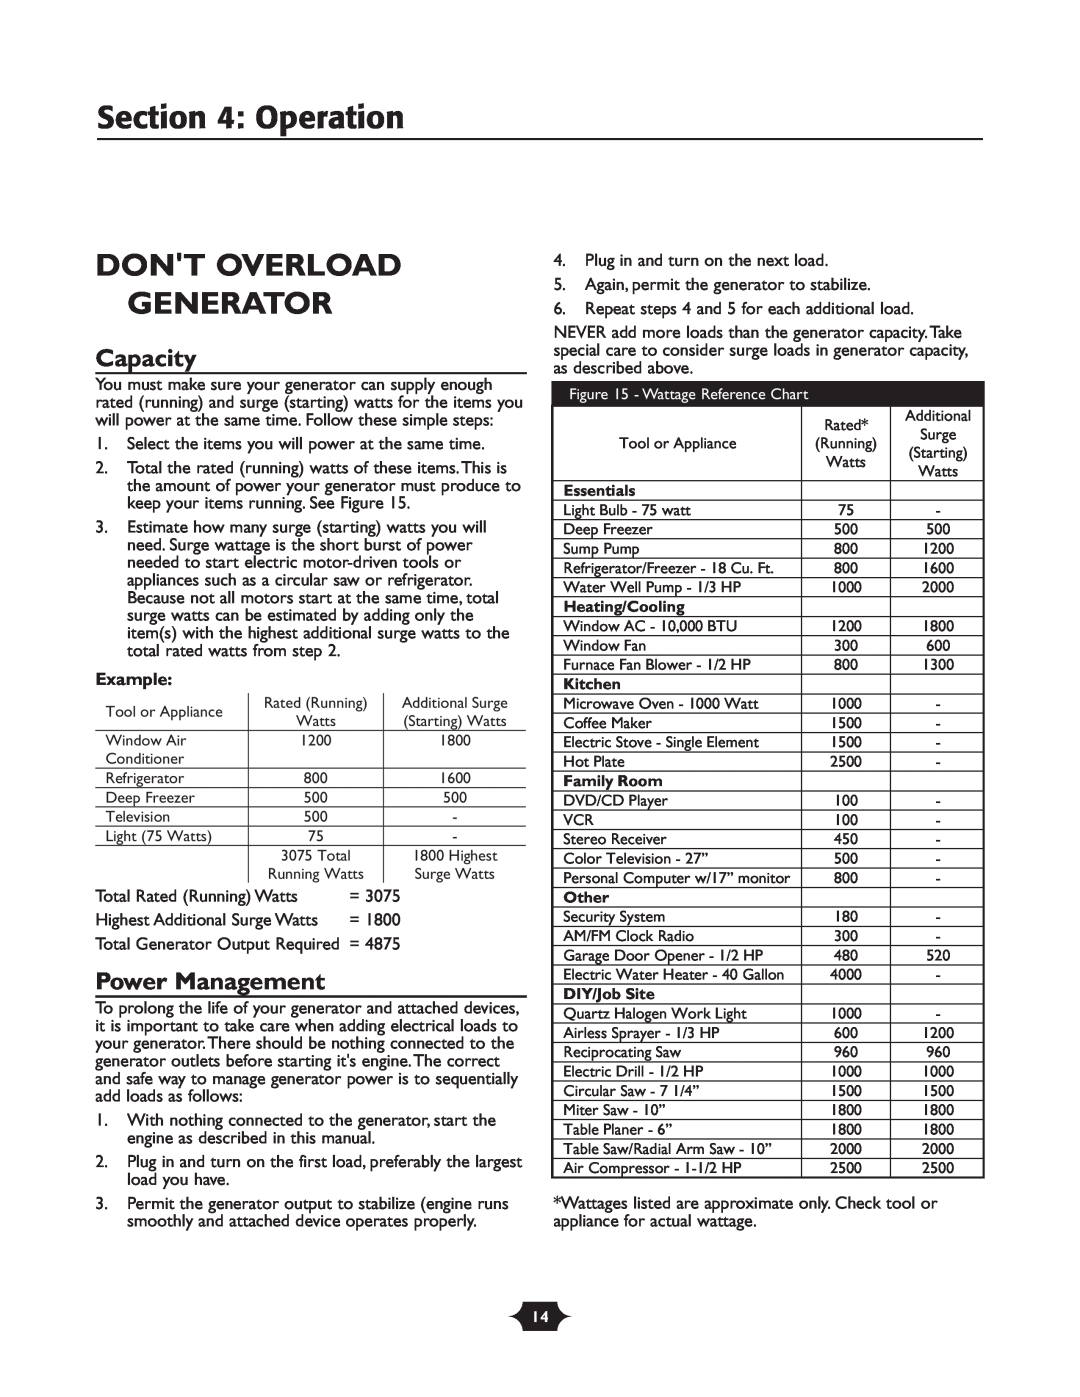 Briggs & Stratton 30237 owner manual Dont Overload Generator, Capacity, Power Management, Operation 